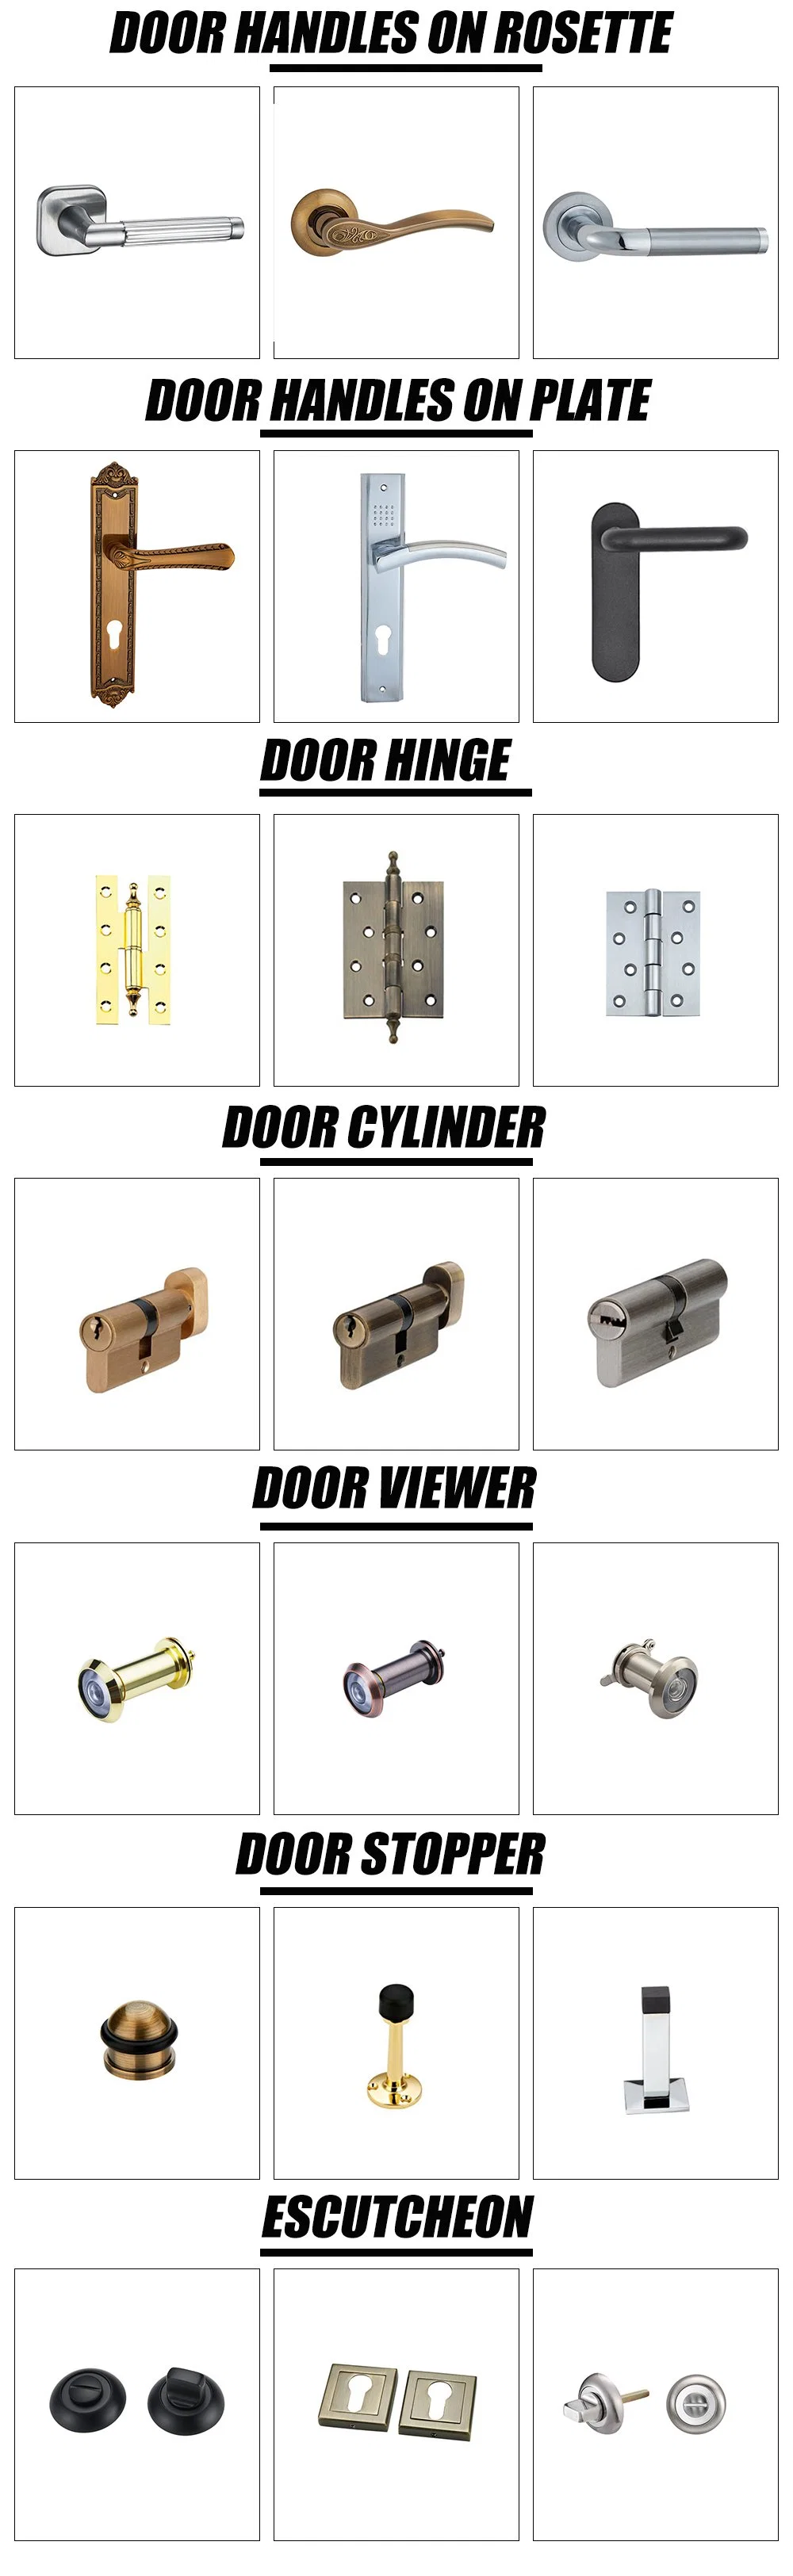 65kg Concealed Door Closer Overhead Cam Action Closers Door Loading 143lbs Square Strong Embedded